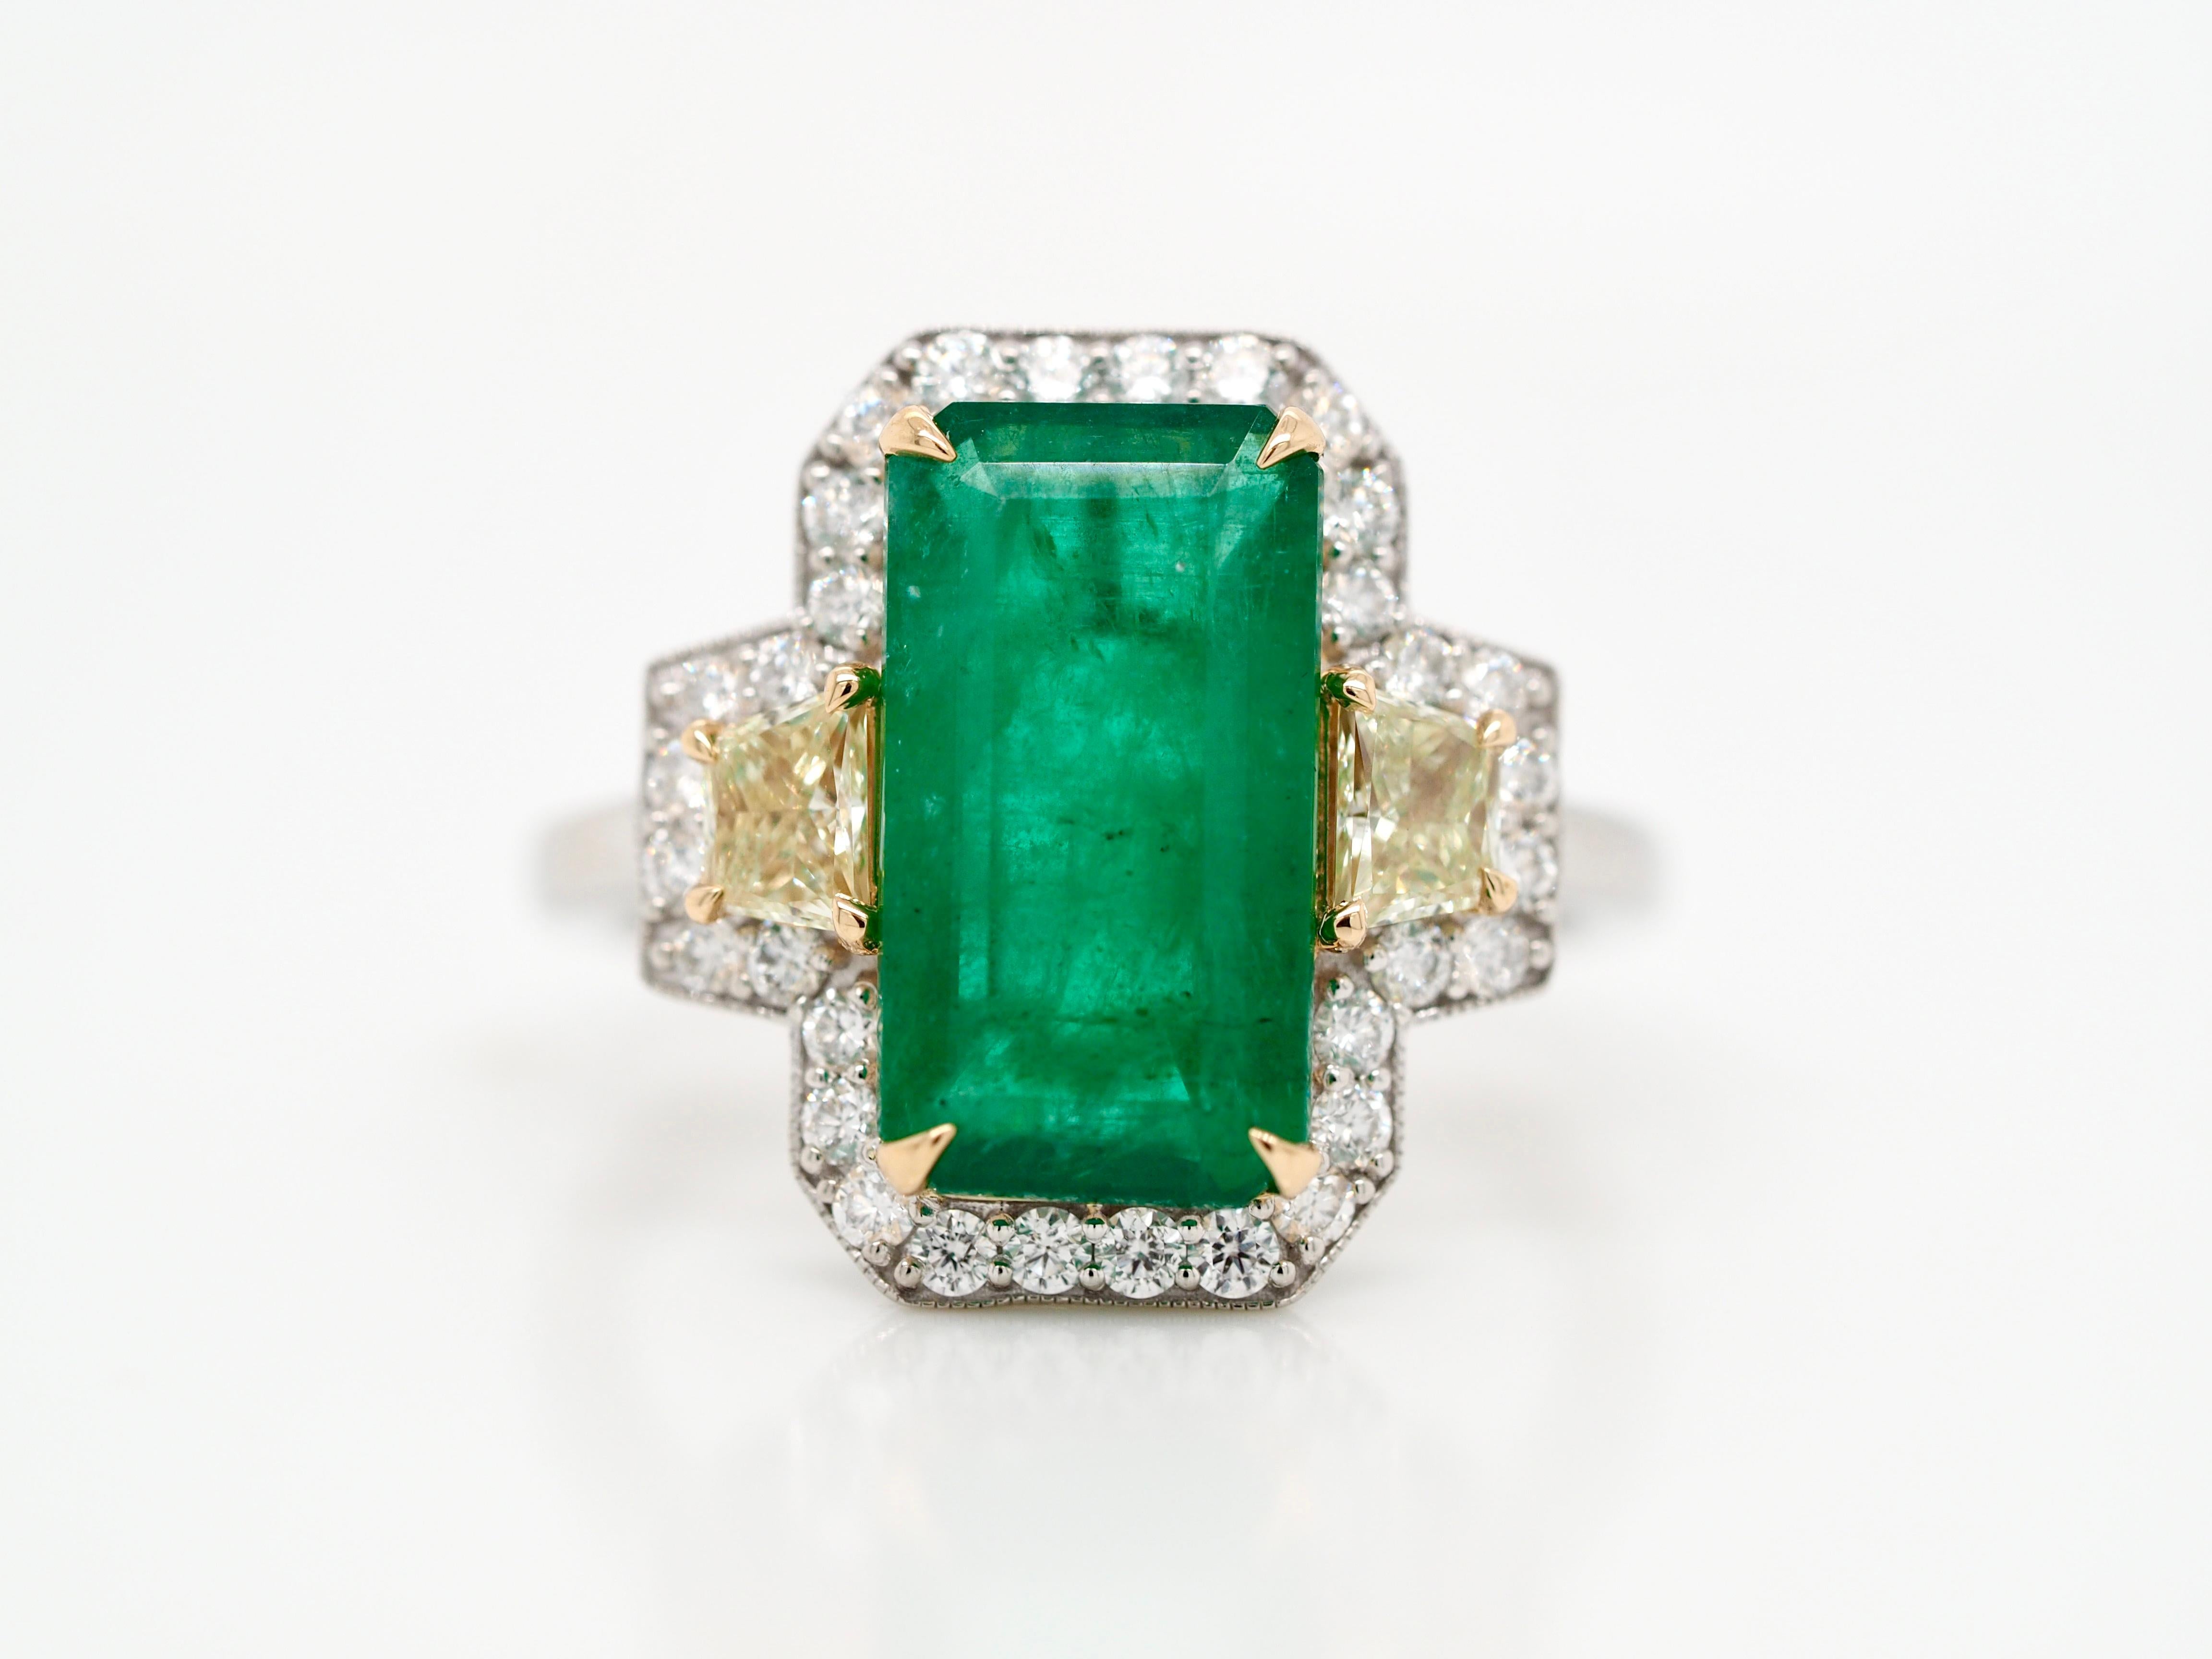 This enchanting ring is memorizing to look at. It has the most beautiful natural emerald, mined from Zambia, set with gold prongs, surrounded by diamond's. On both sides of the emerald, a ray of yellow diamond's brighten up the ring. This is unique